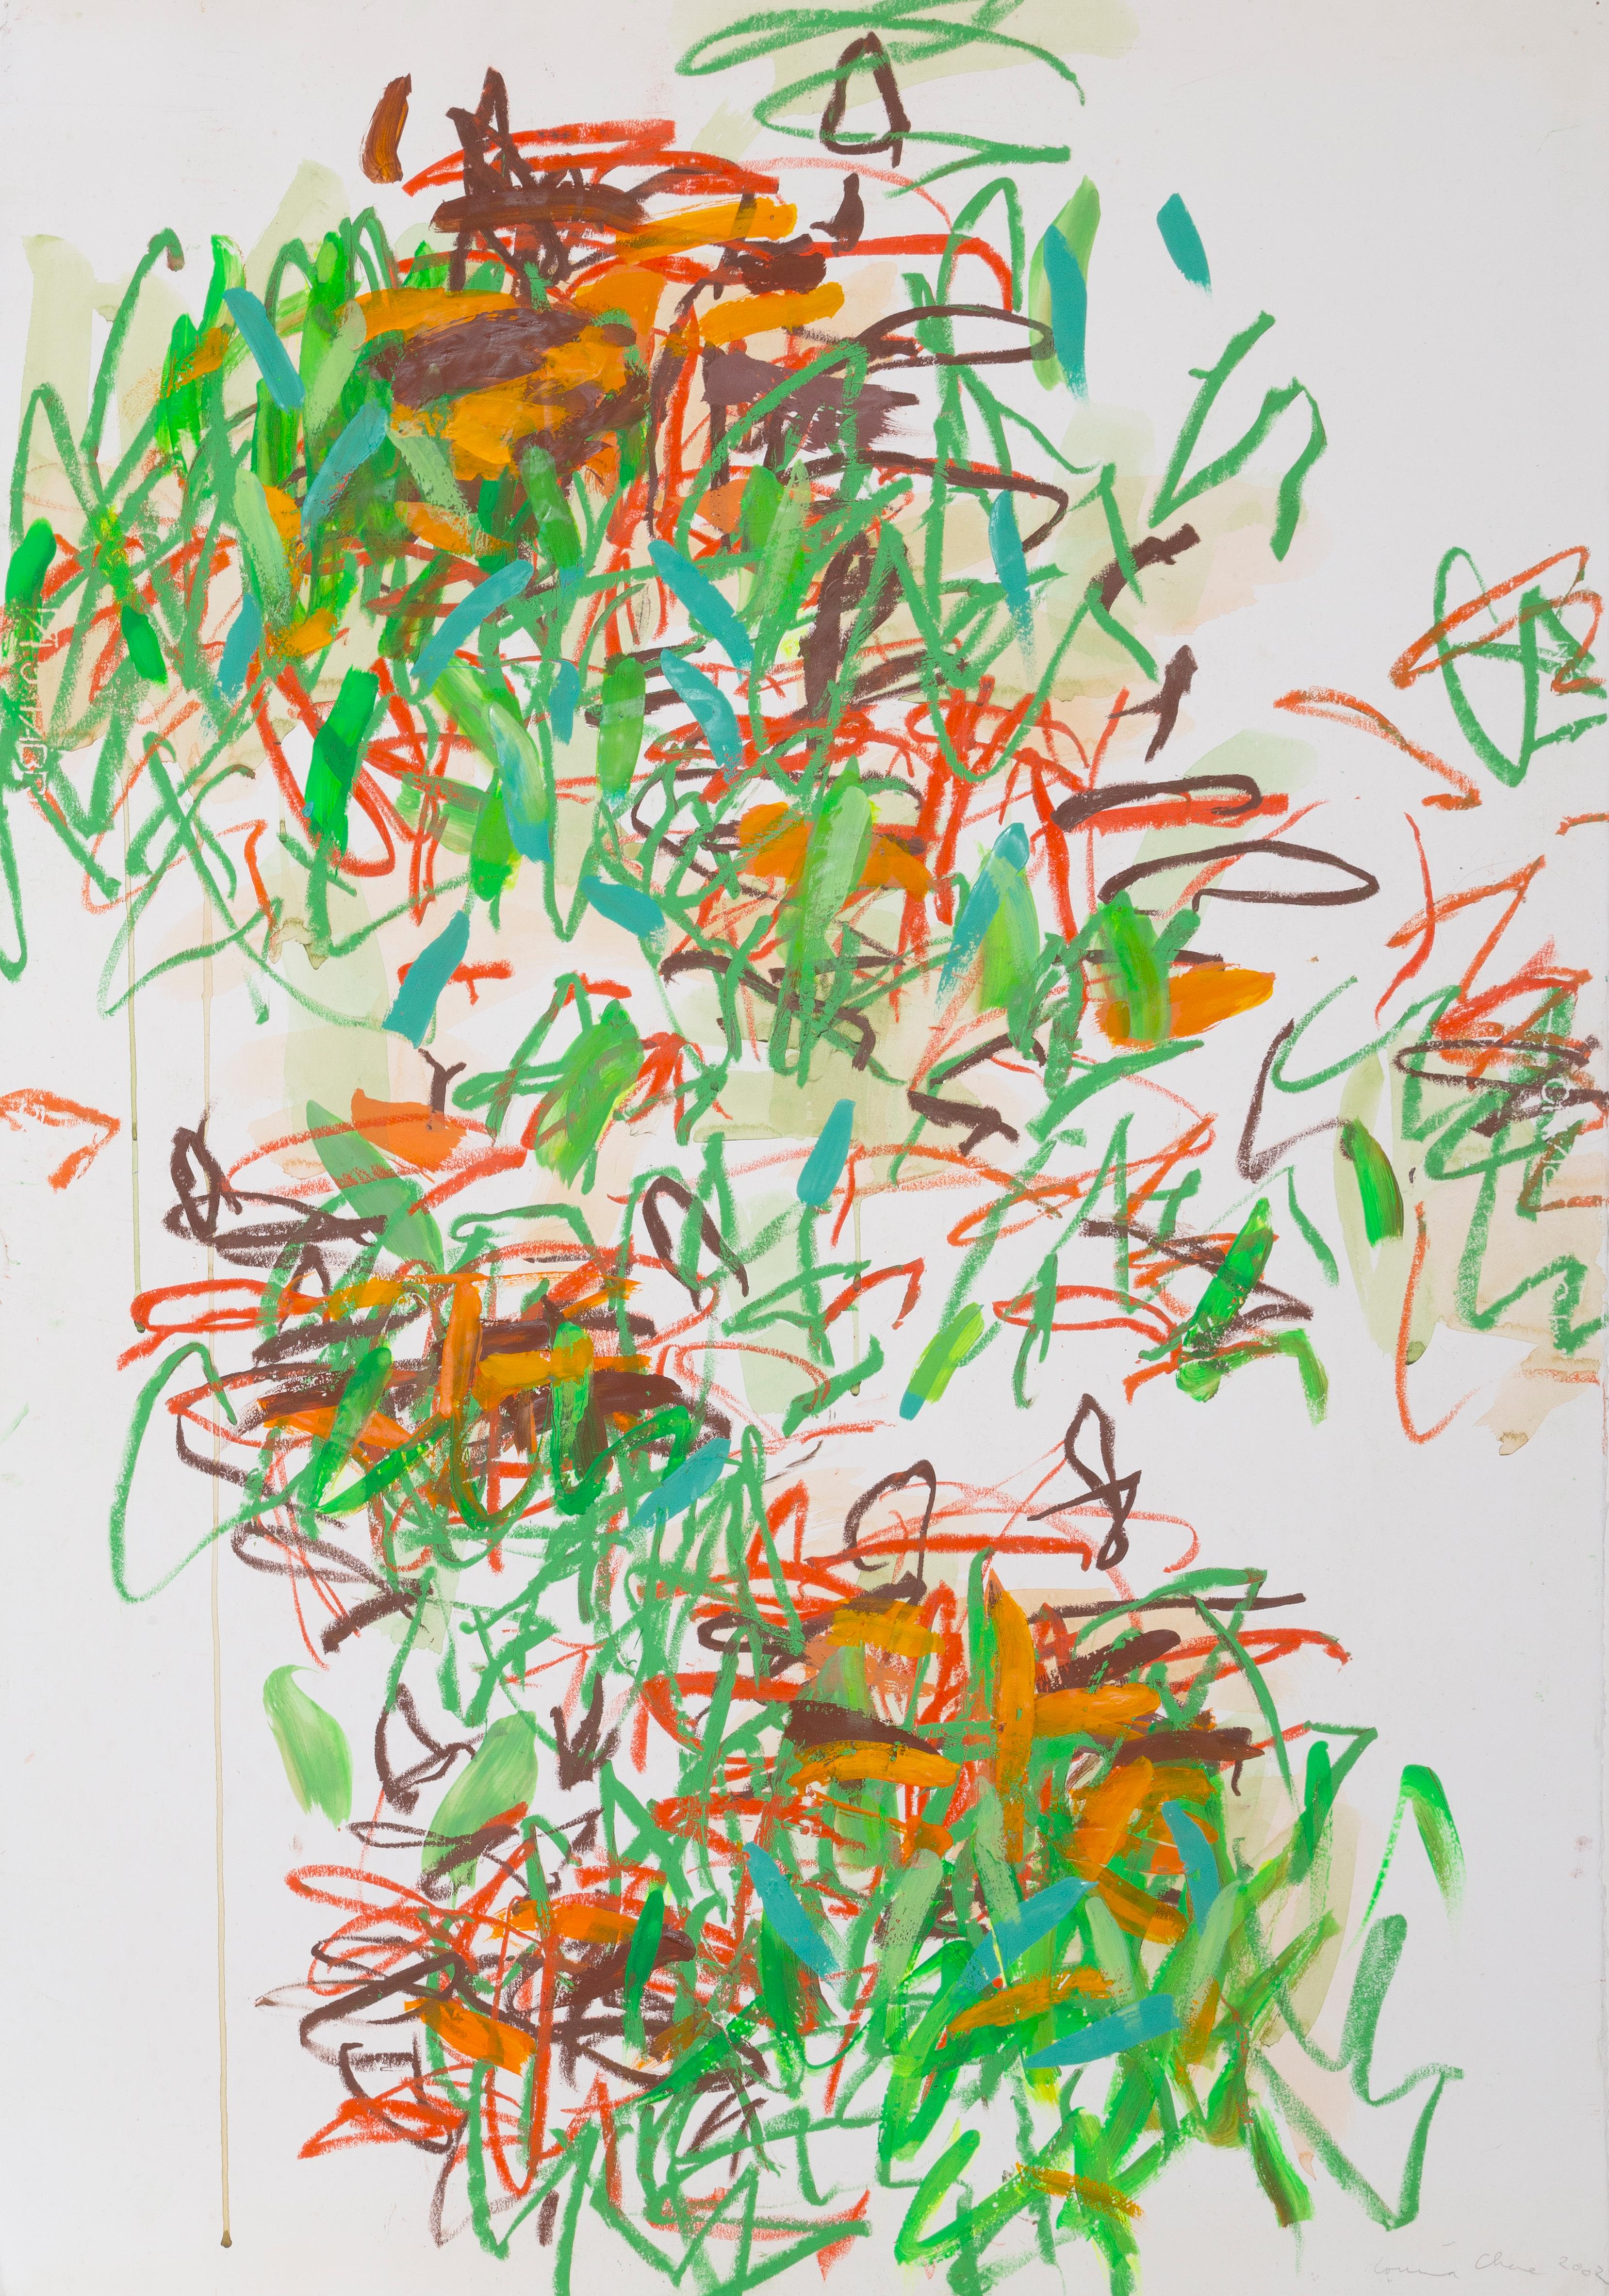 Artist: Louisa Chase, American (1951 - 2016)
Title: Untitled - Tyger Tyger
Year: 2002
Medium: Acrylic and oil pastel on paper, signed and dated in pencil
Size: 39.25 x 27.75 in. (99.7 x 70.49 cm)
